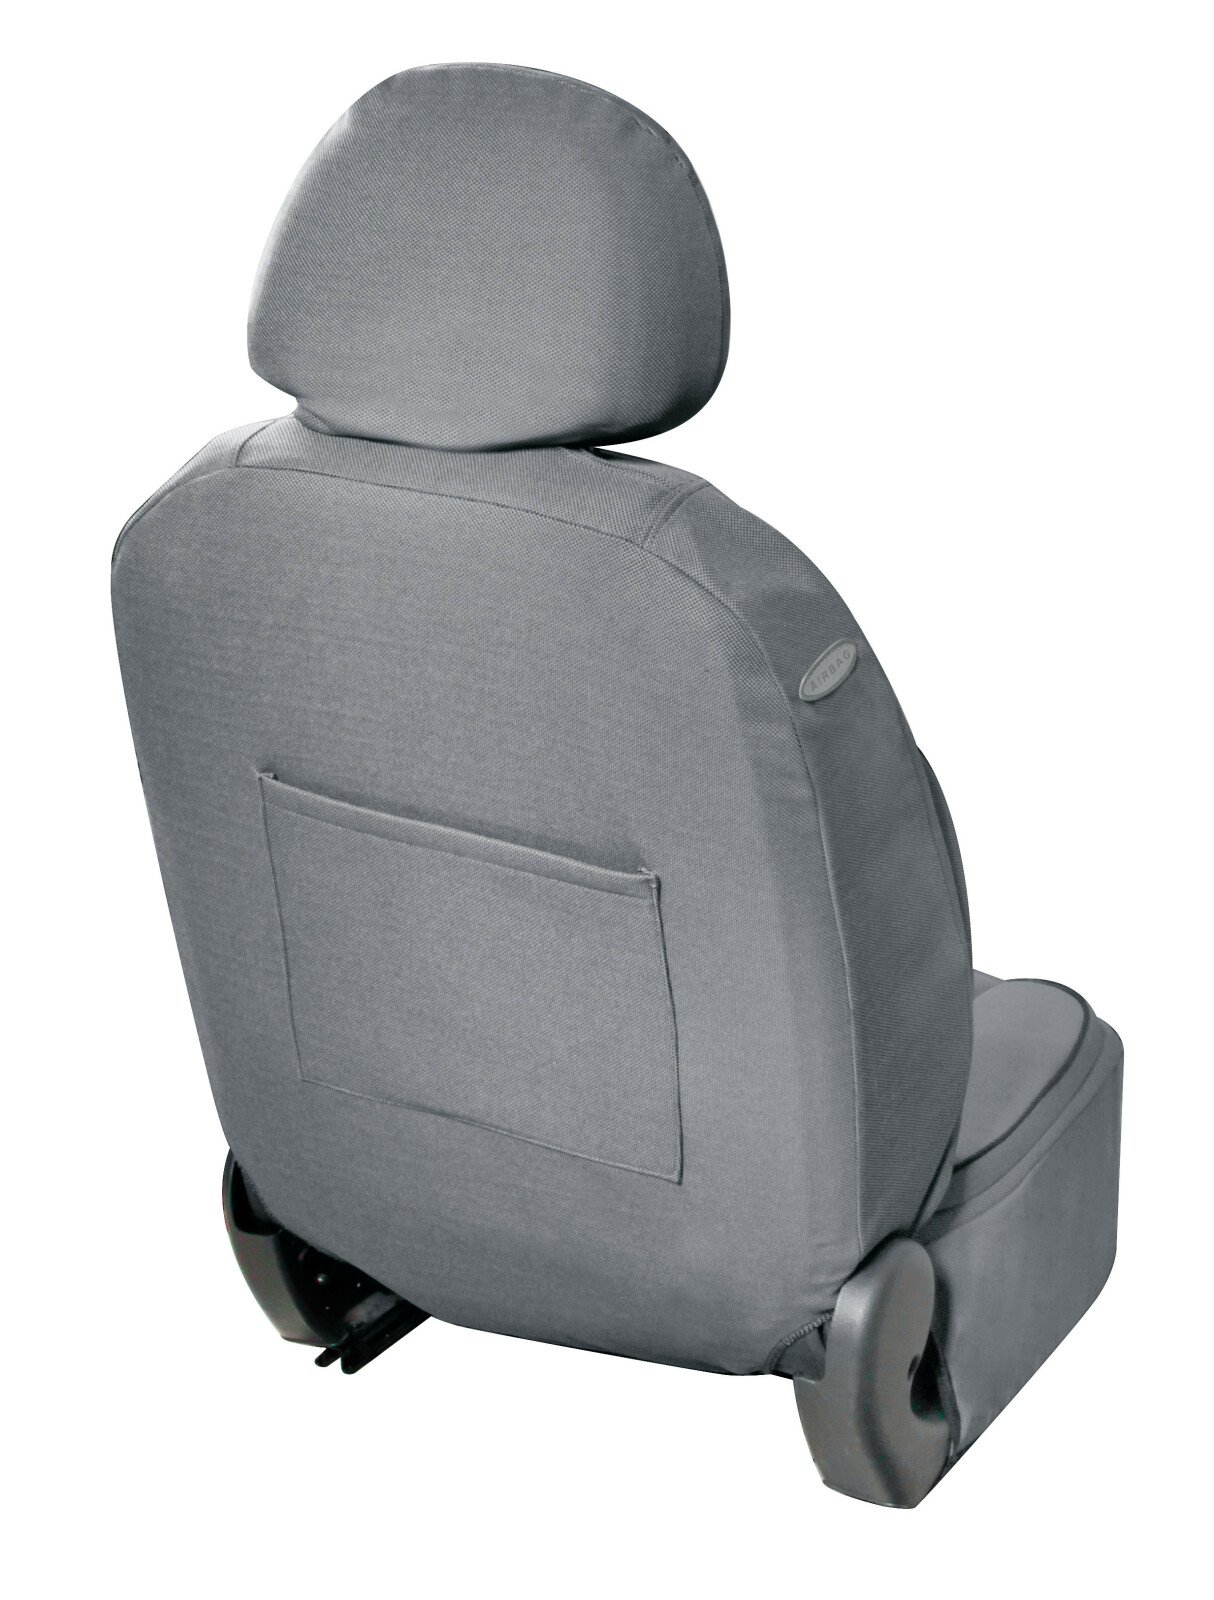 De-Luxe Sport Edition, high-quality front seat covers - Black thumb